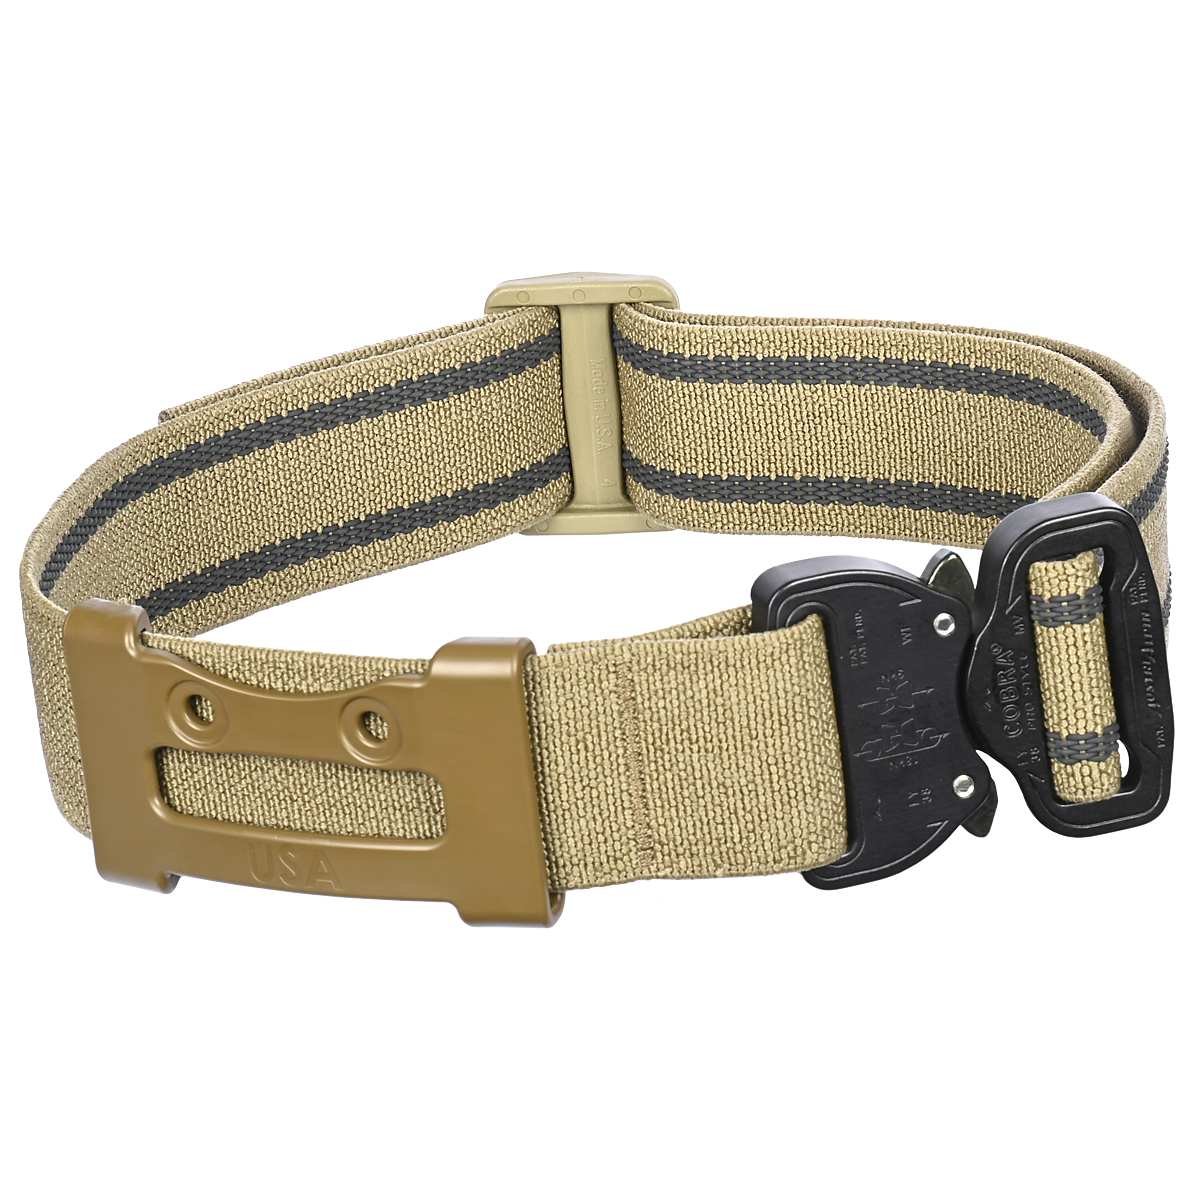 Introducing: NEW Leg Strap Adapter for ALQD & Duty Holster 